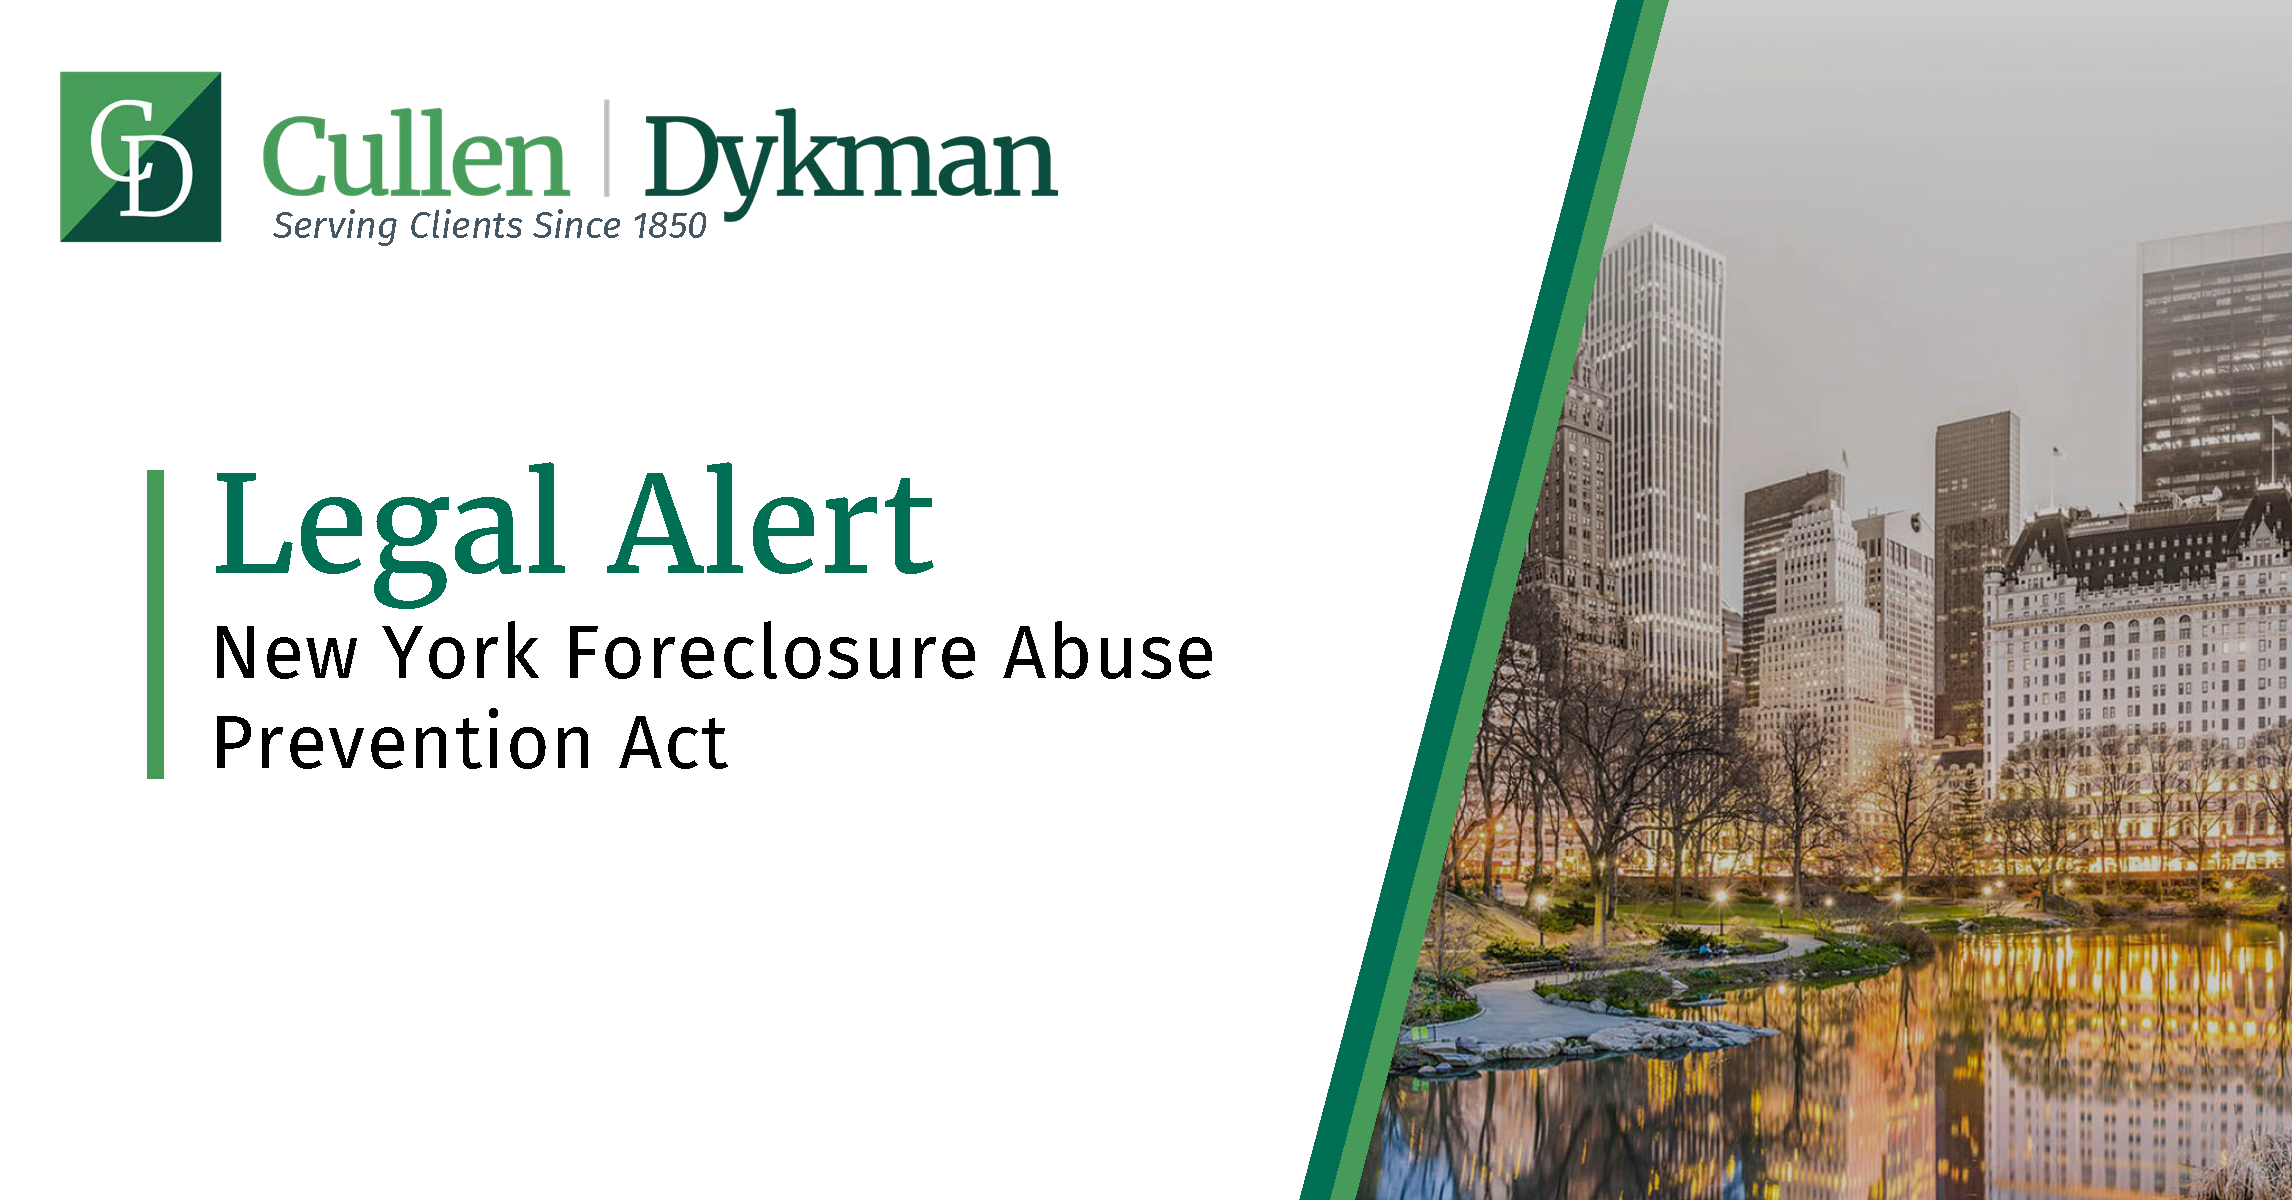 New York Foreclosure Abuse Prevention Act Cullen and Dykman LLP